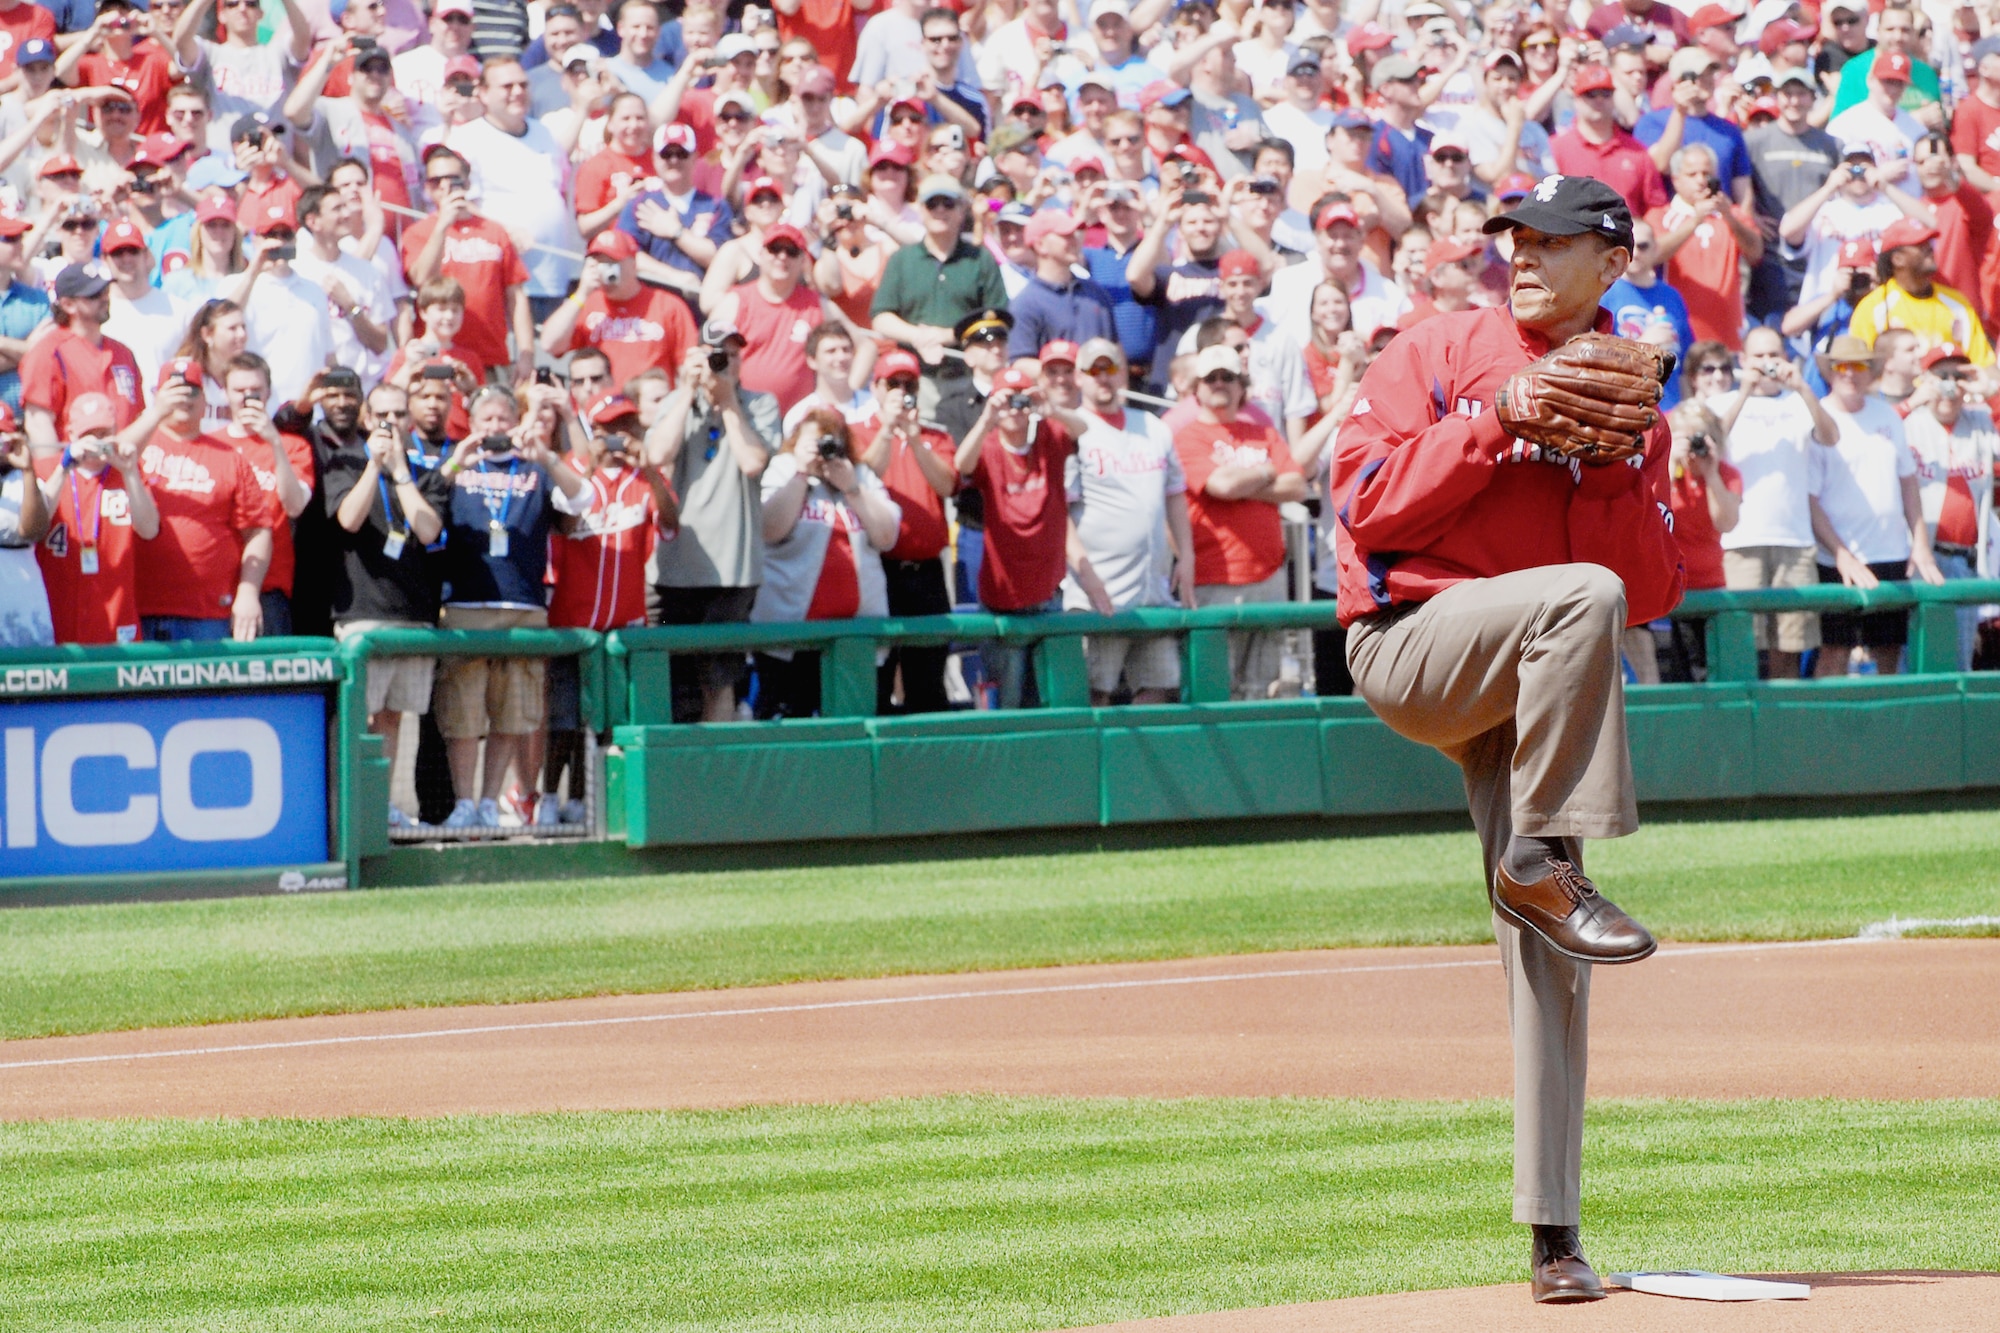 President Barack Obama throws out the ceremonial first pitch to start the baseball season for the Washington Nationals April 5, 2010, at Nationals Ball Park in Washington, D.C. The Washington Nationals honored military children, inviting nine children whose parents are deployed to step onto the infield with the starting players to see the president throw out the first pitch. (DOD photo/Navy Petty Officer 2nd Class William Selby) 